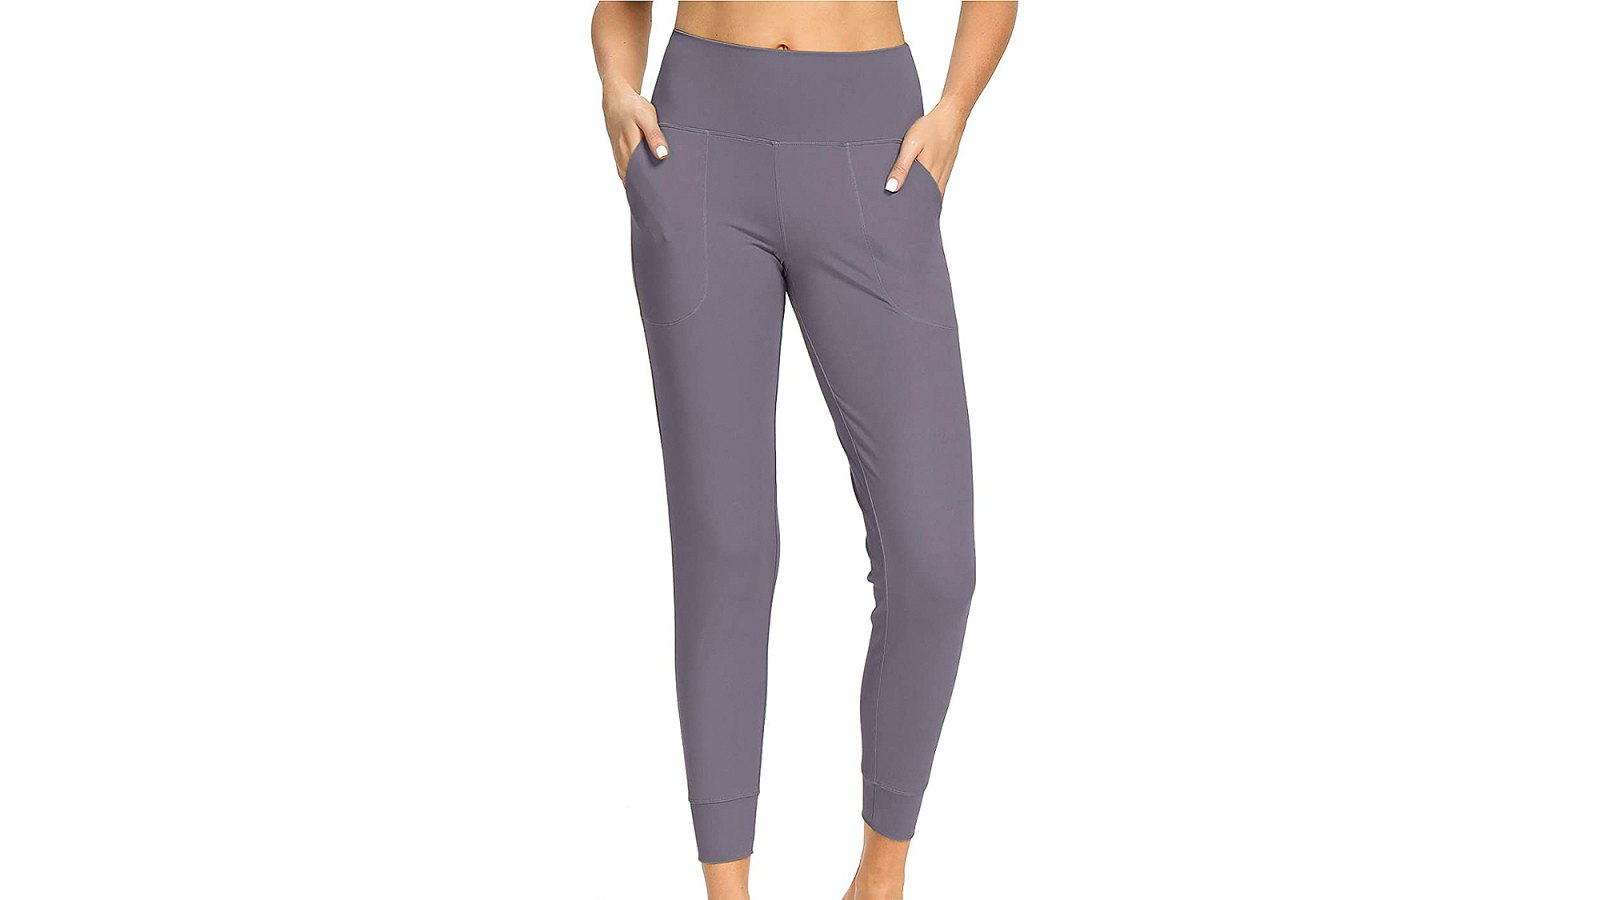 Mesily Women's Athletic High Waist Sweatpant Yoga Pant with Pockets